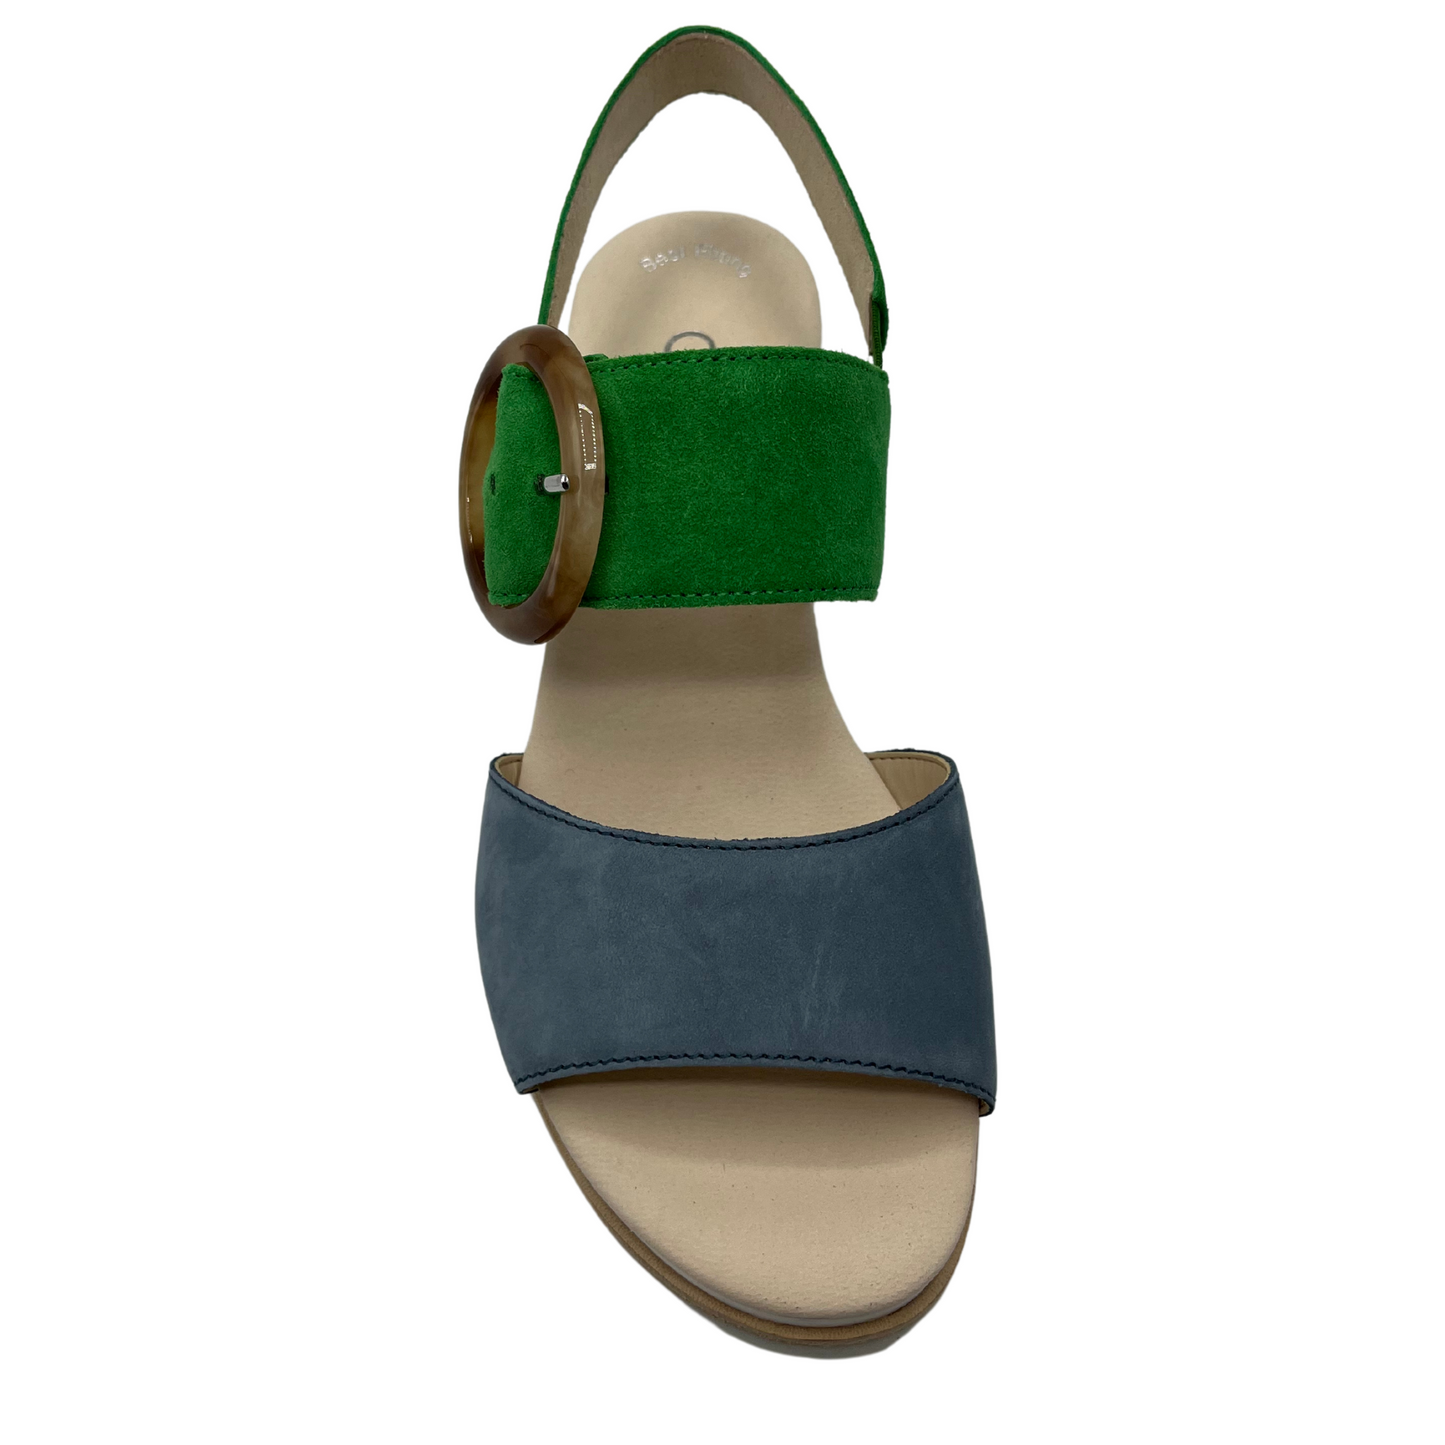 Top view of green and blue sandal with open toe and round buckle on top strap